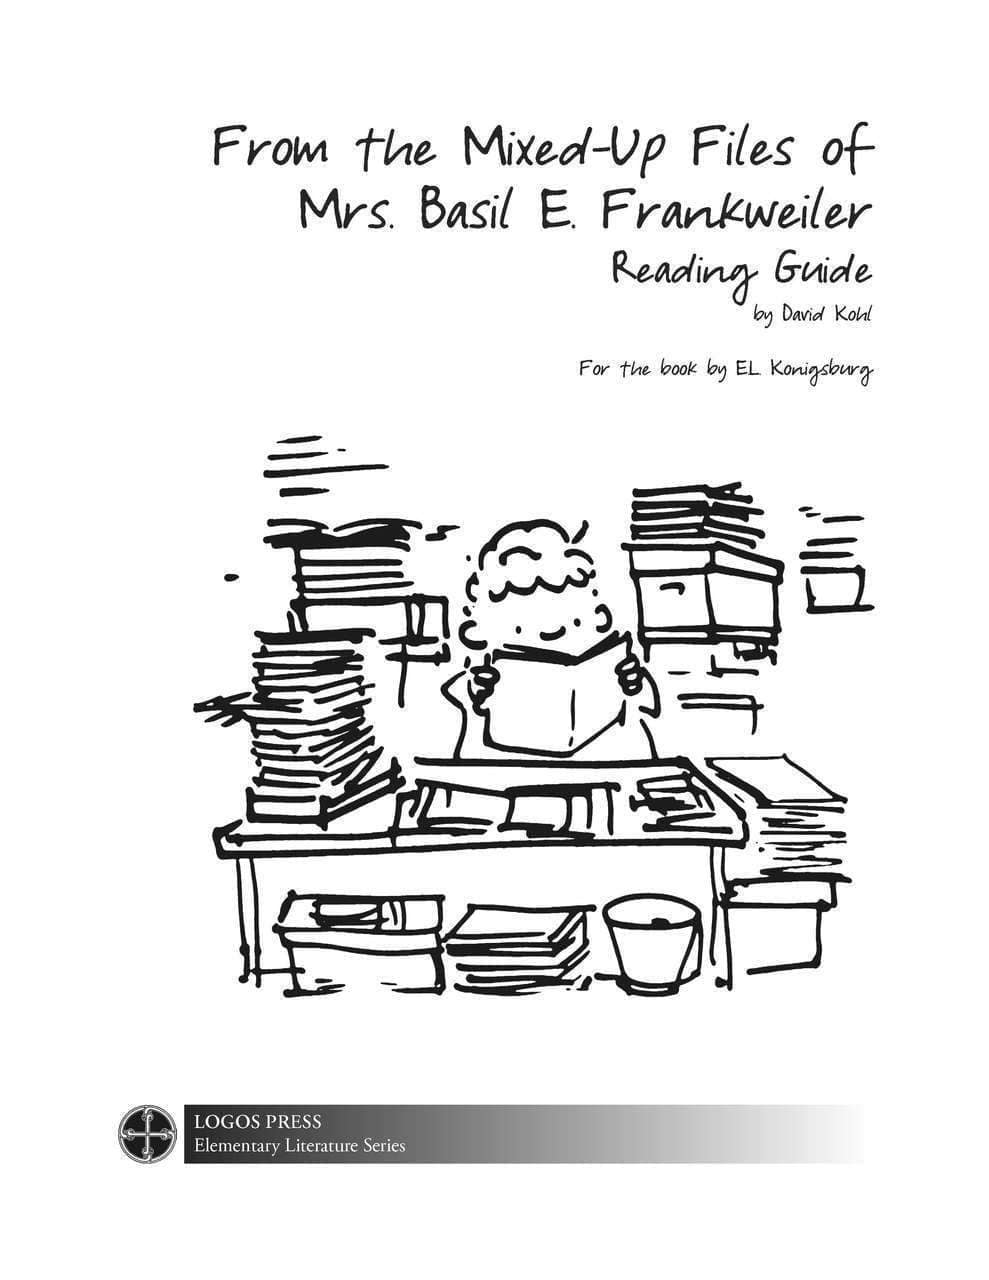 From the Mixed up files of Mrs. Basil E. Frankweiler - Reading Guide (Download)